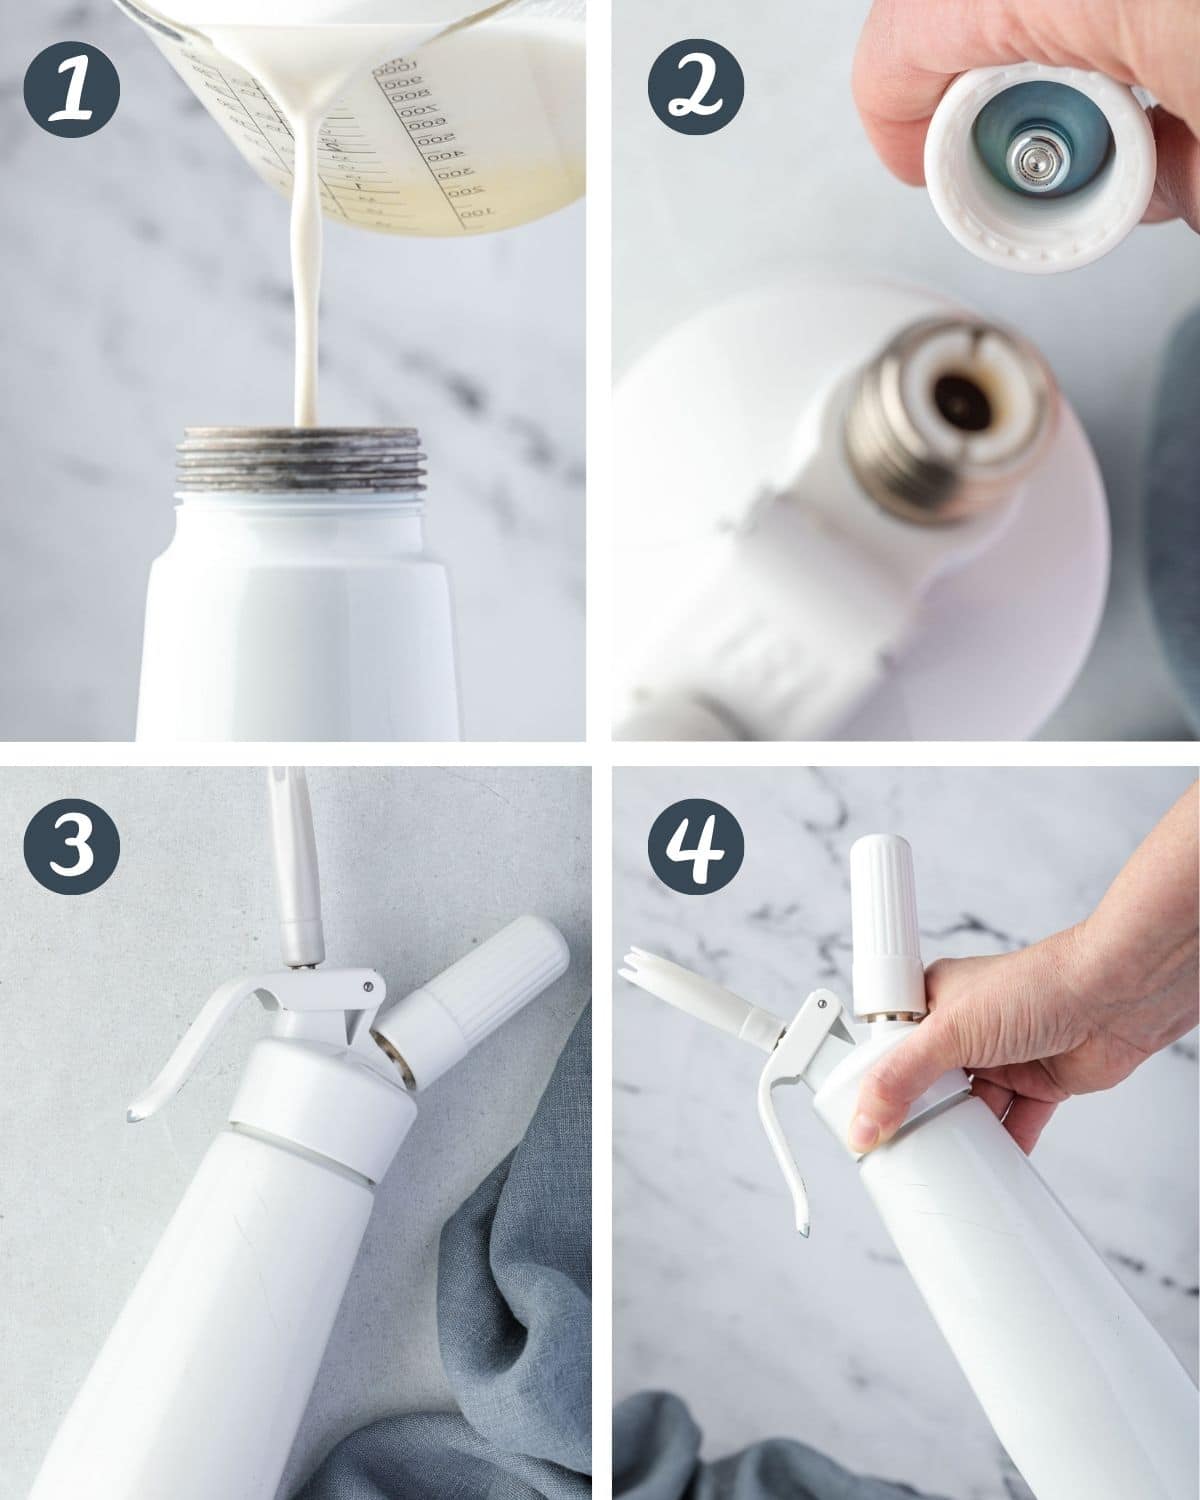 Collage showing 4 steps of making whipped cream in a dispenser.